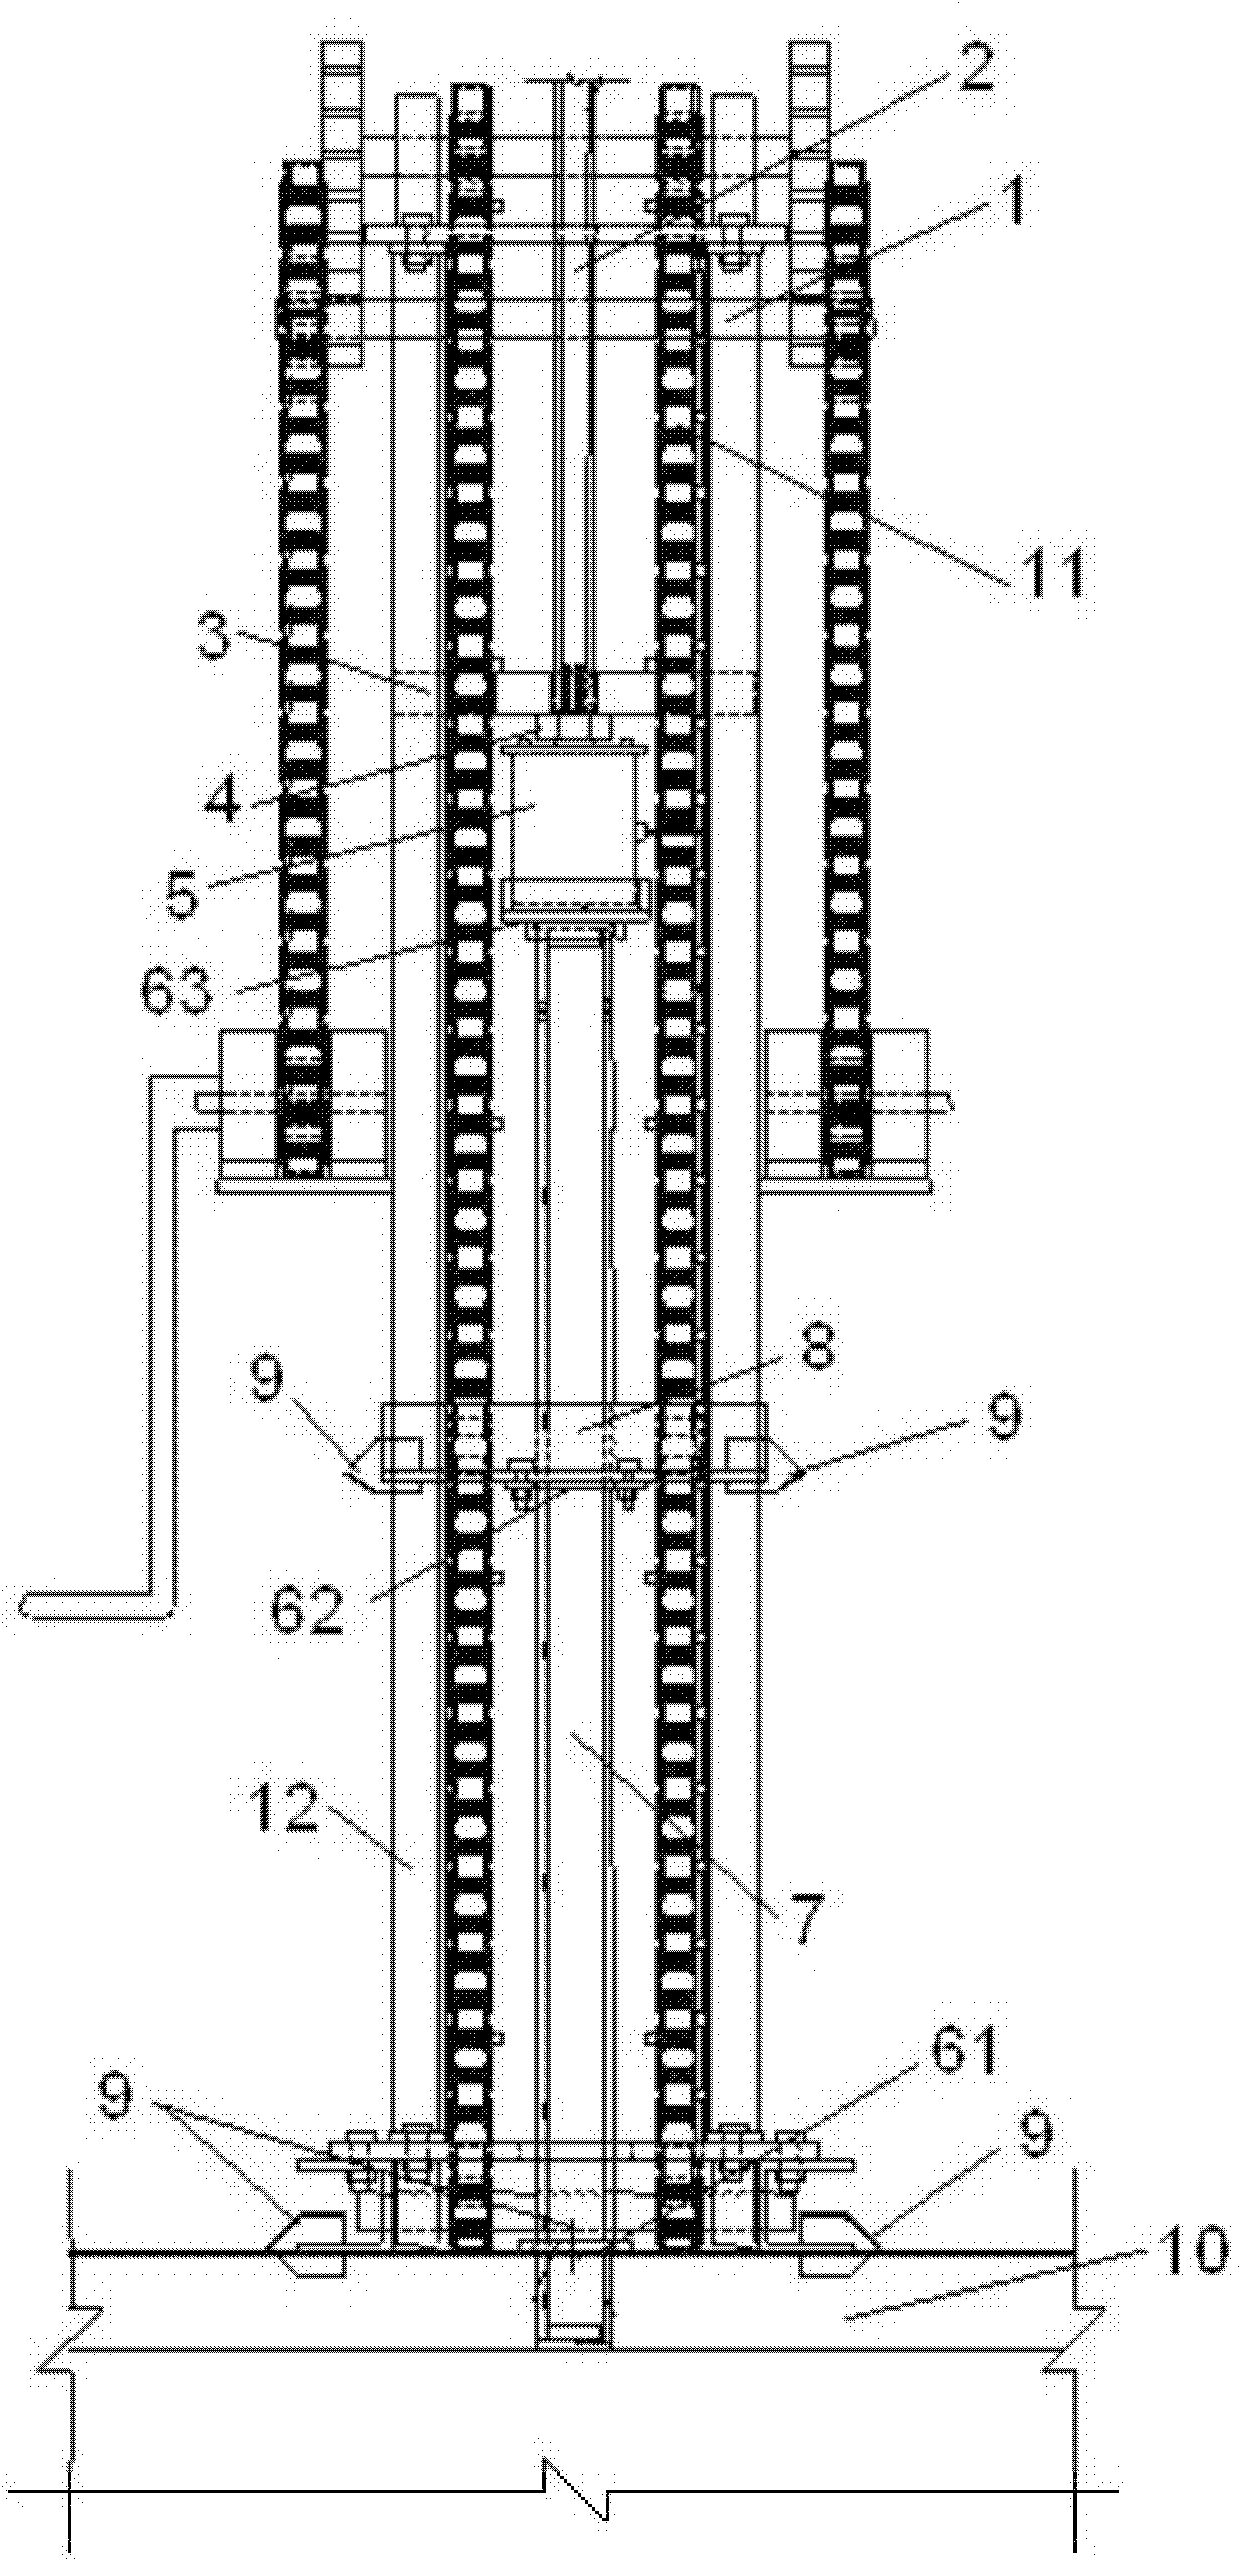 Model test device for simulating jacked pile driving process